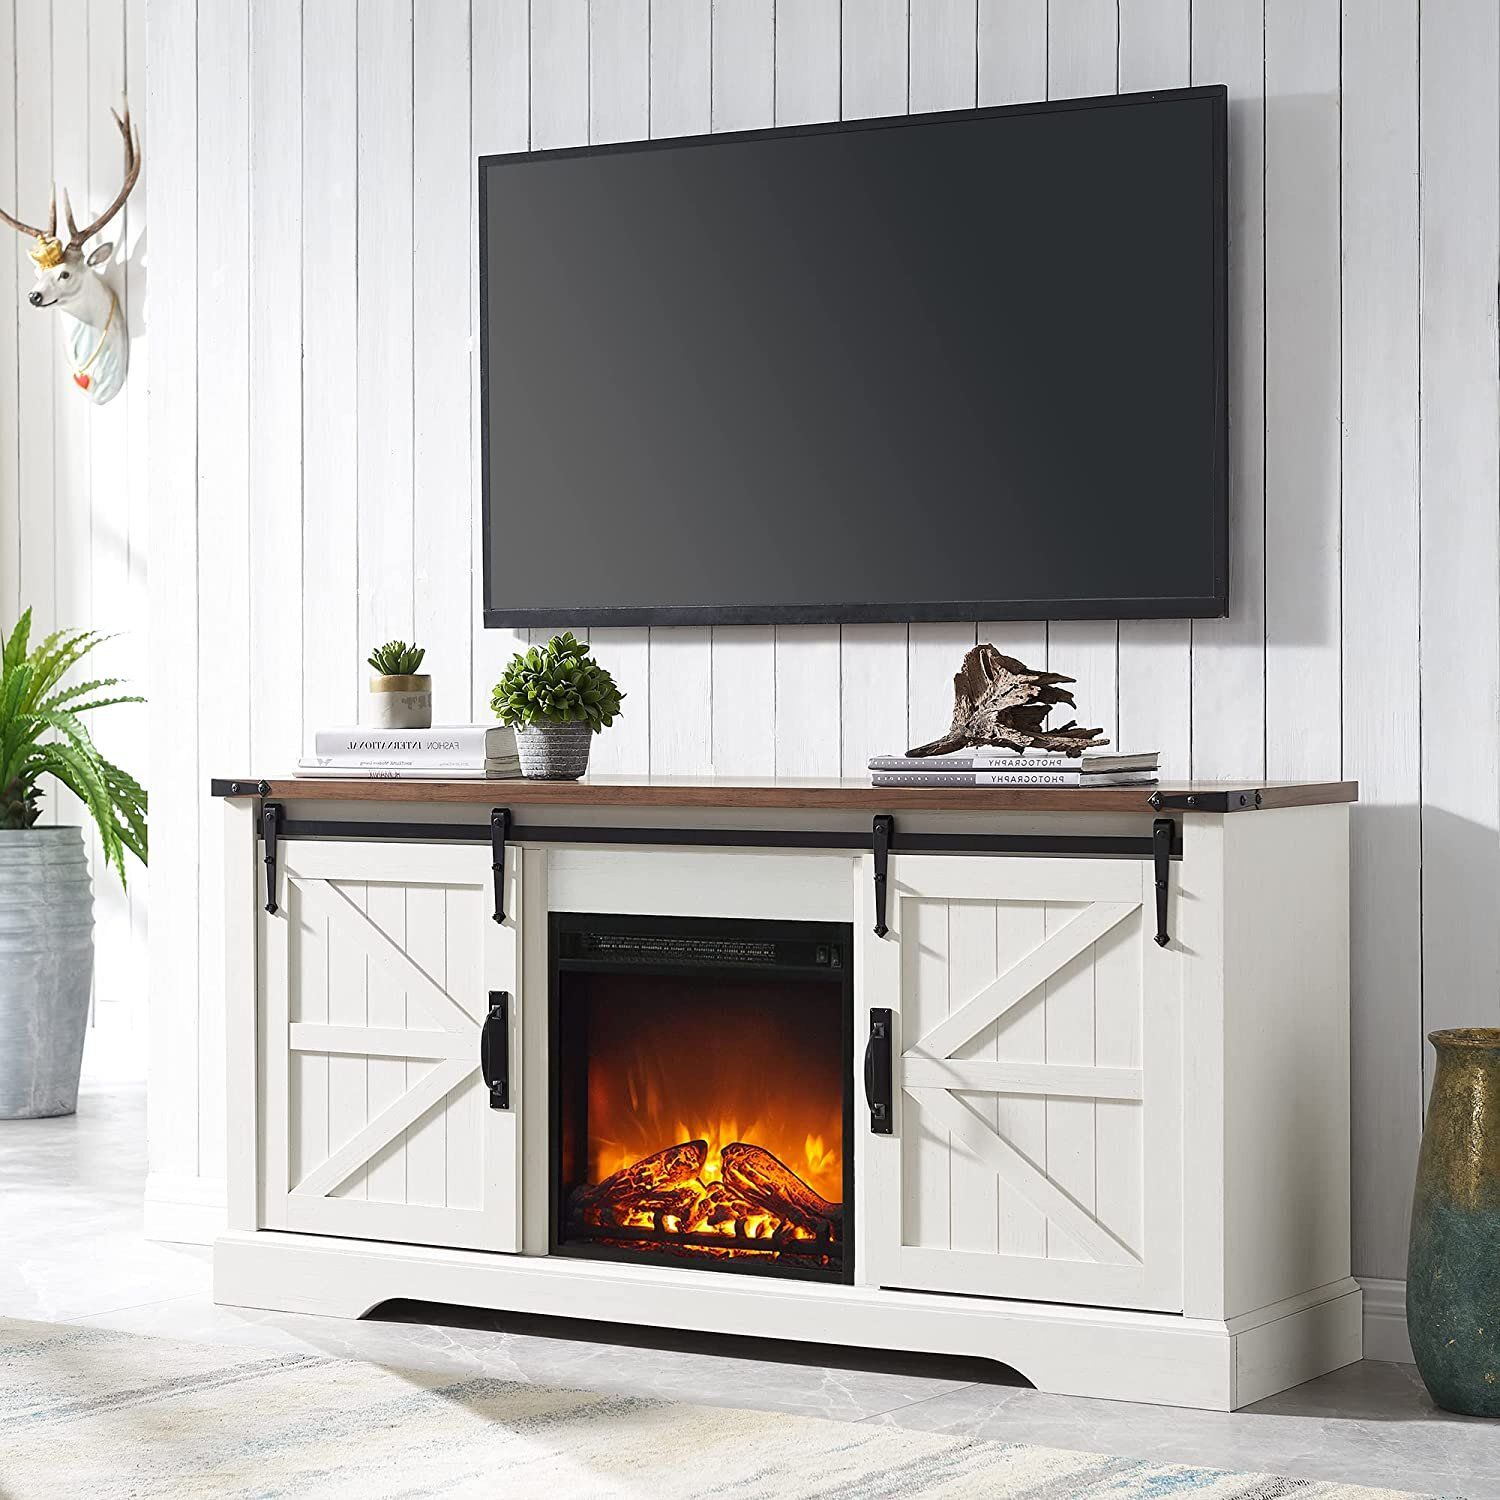 Gracie Oaks Farmhouse Tv Stand For 65 Inch Tv With 18" Electric Fireplace,  Sliding Barn Door, Adjustable Storage & Reviews | Wayfair Throughout Farmhouse Stands With Shelves (Photo 11 of 15)